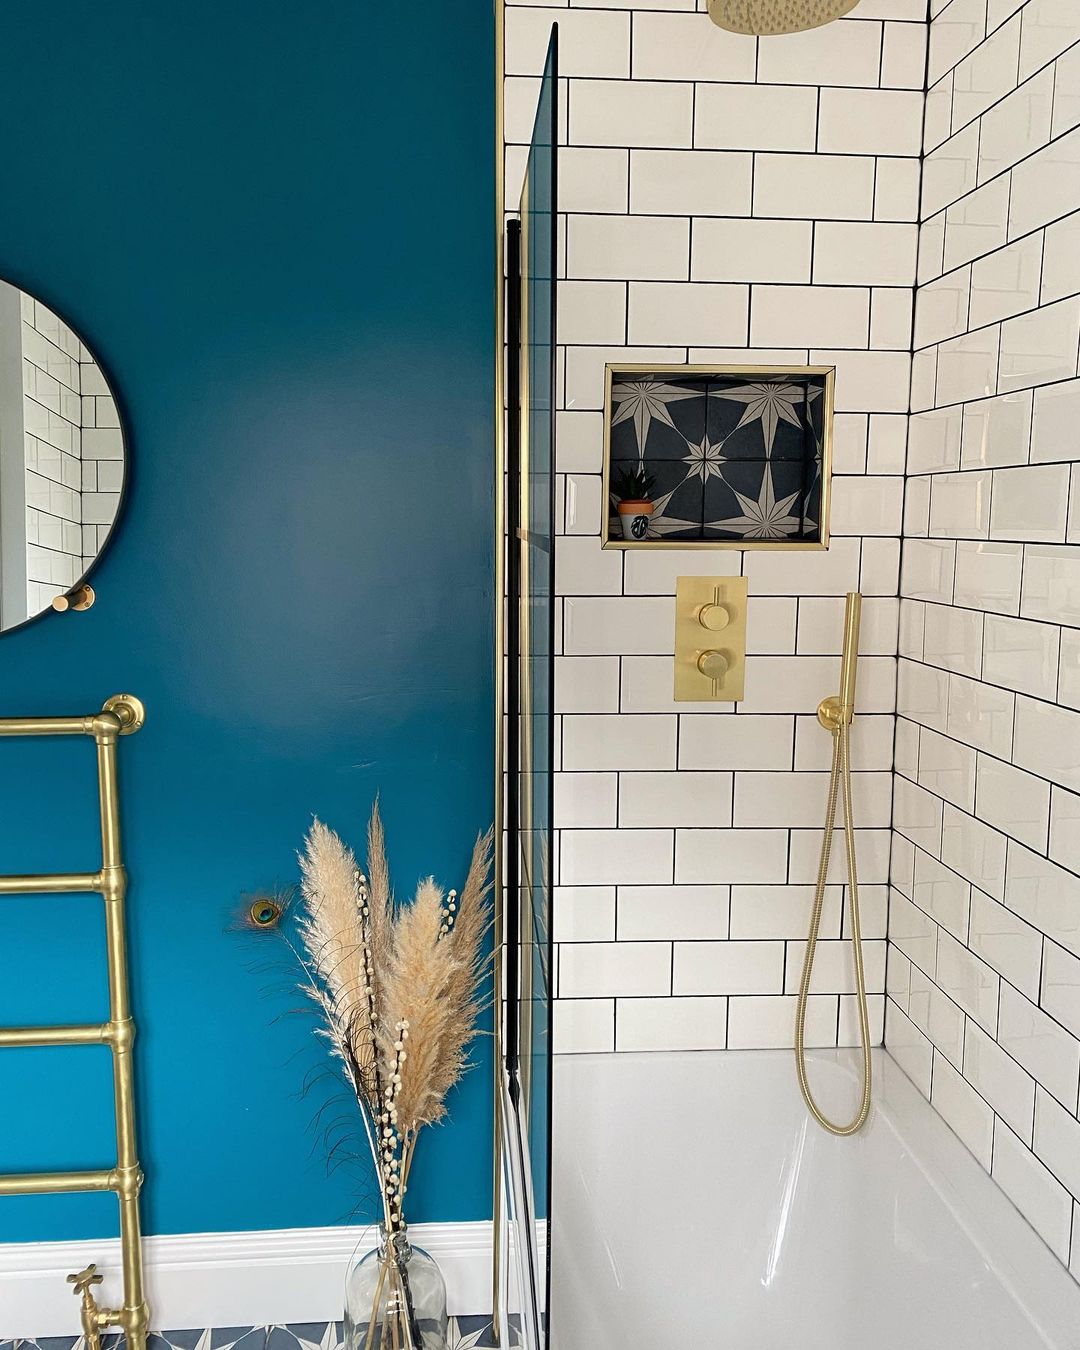 Bathroom with dark blue wall paint Teal Tension